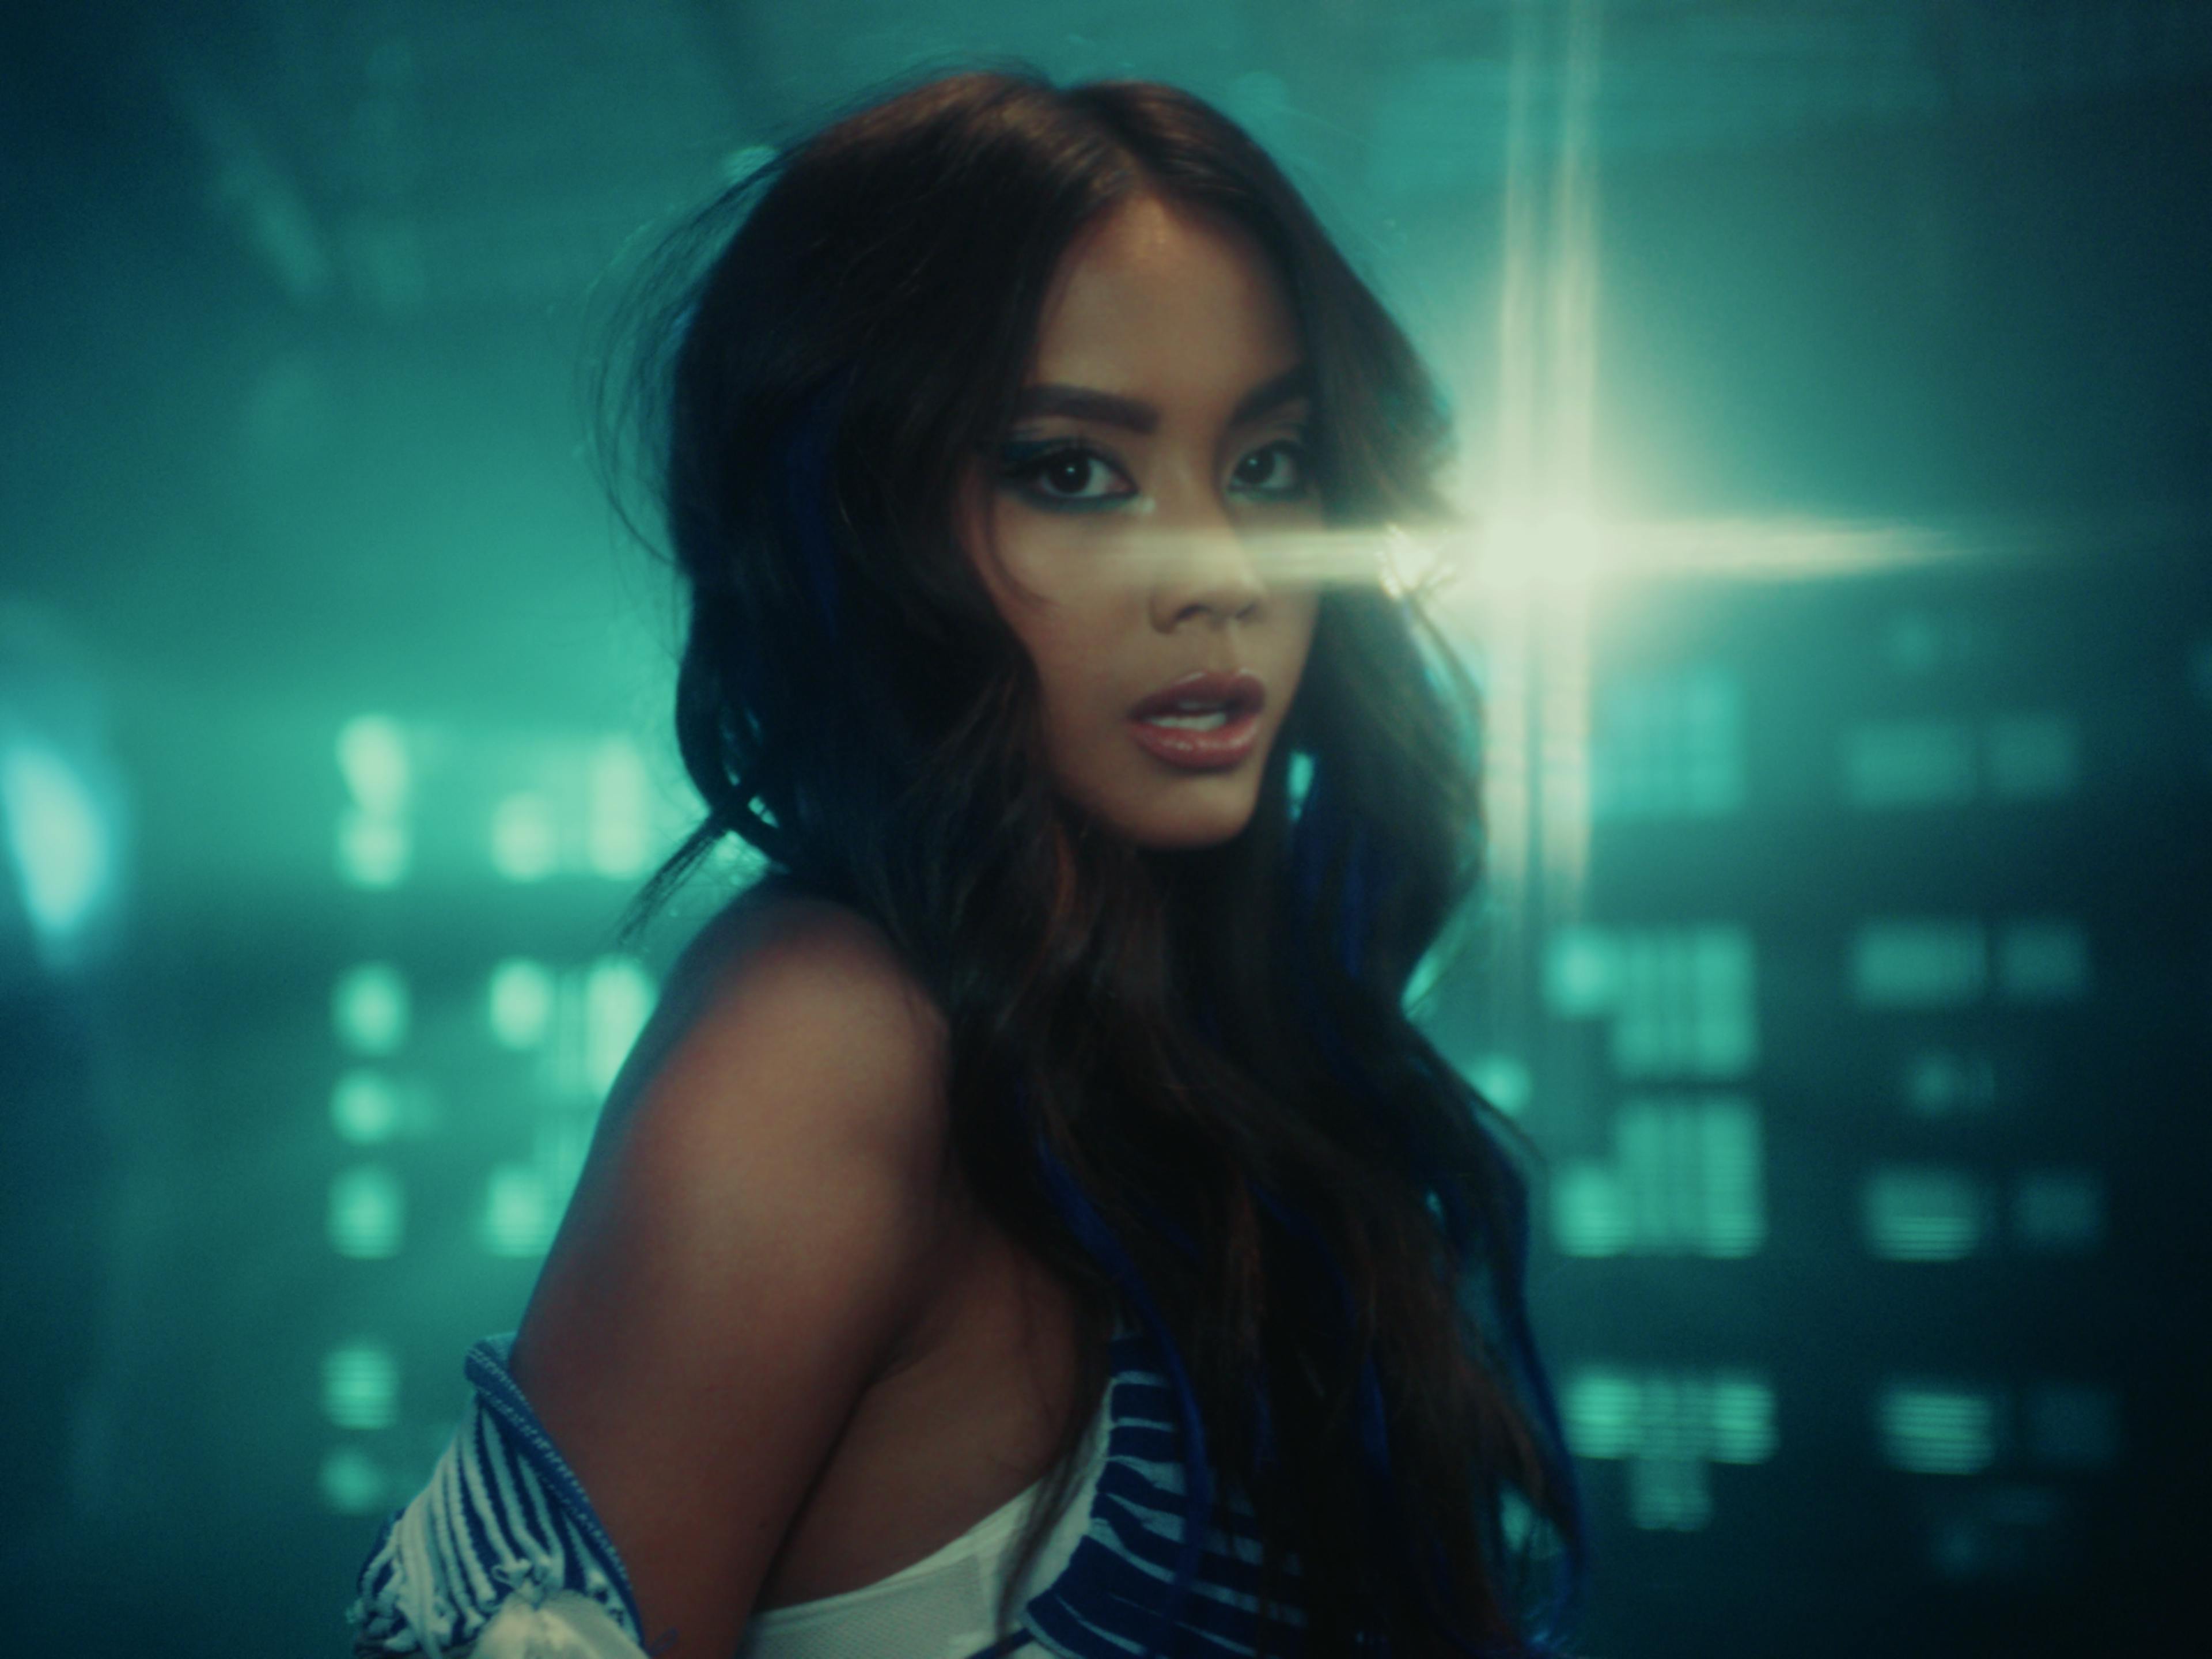 A medium shot of Ylona Garcia as she looks at the camera, dancing inside of a moody teal spaceship